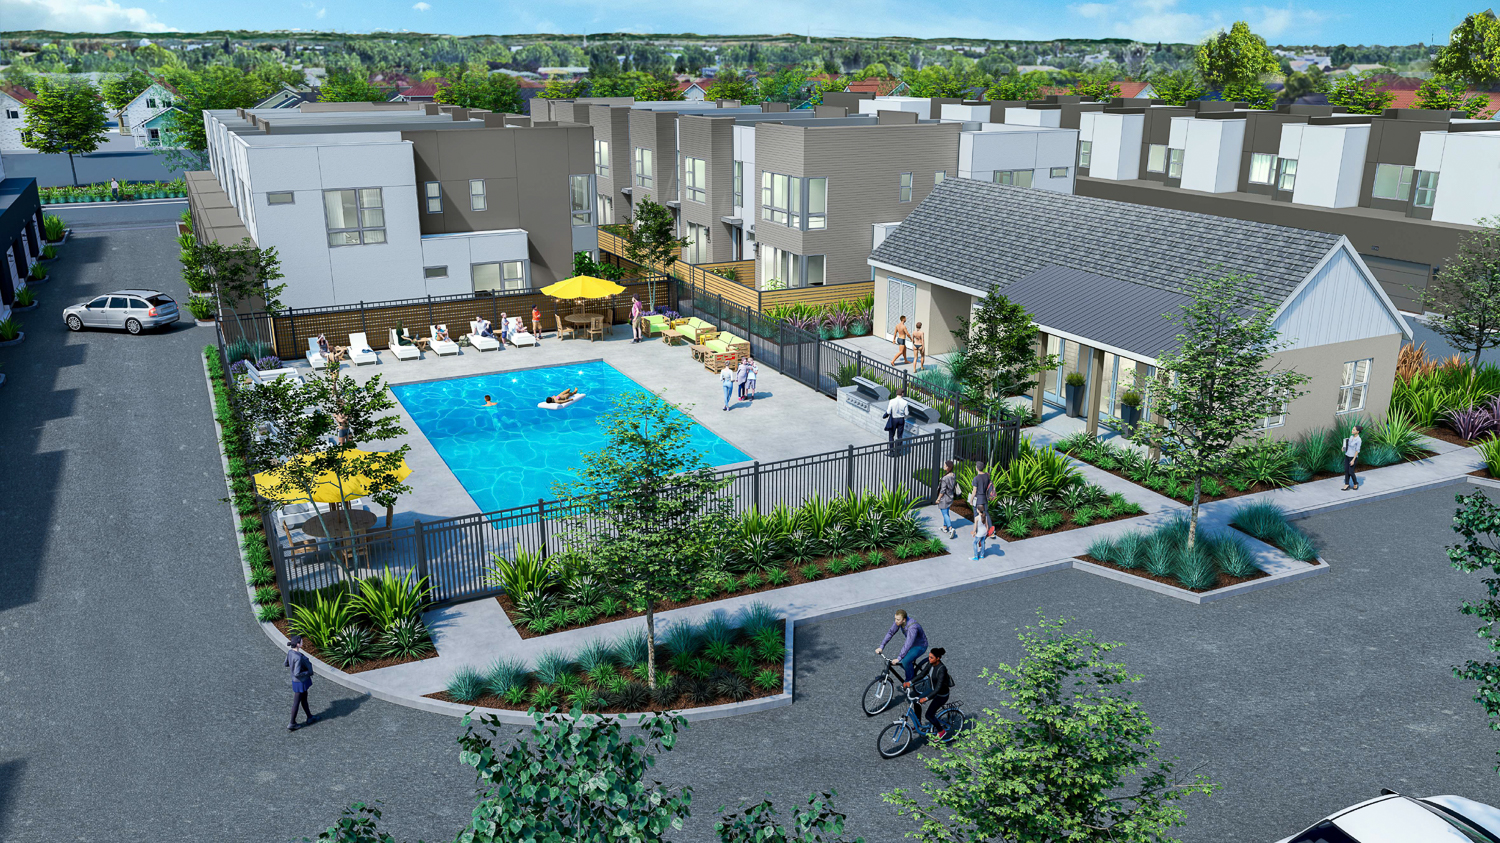 Northpointe Reserve clubhouse and pool, rendering by the Dahlin Group